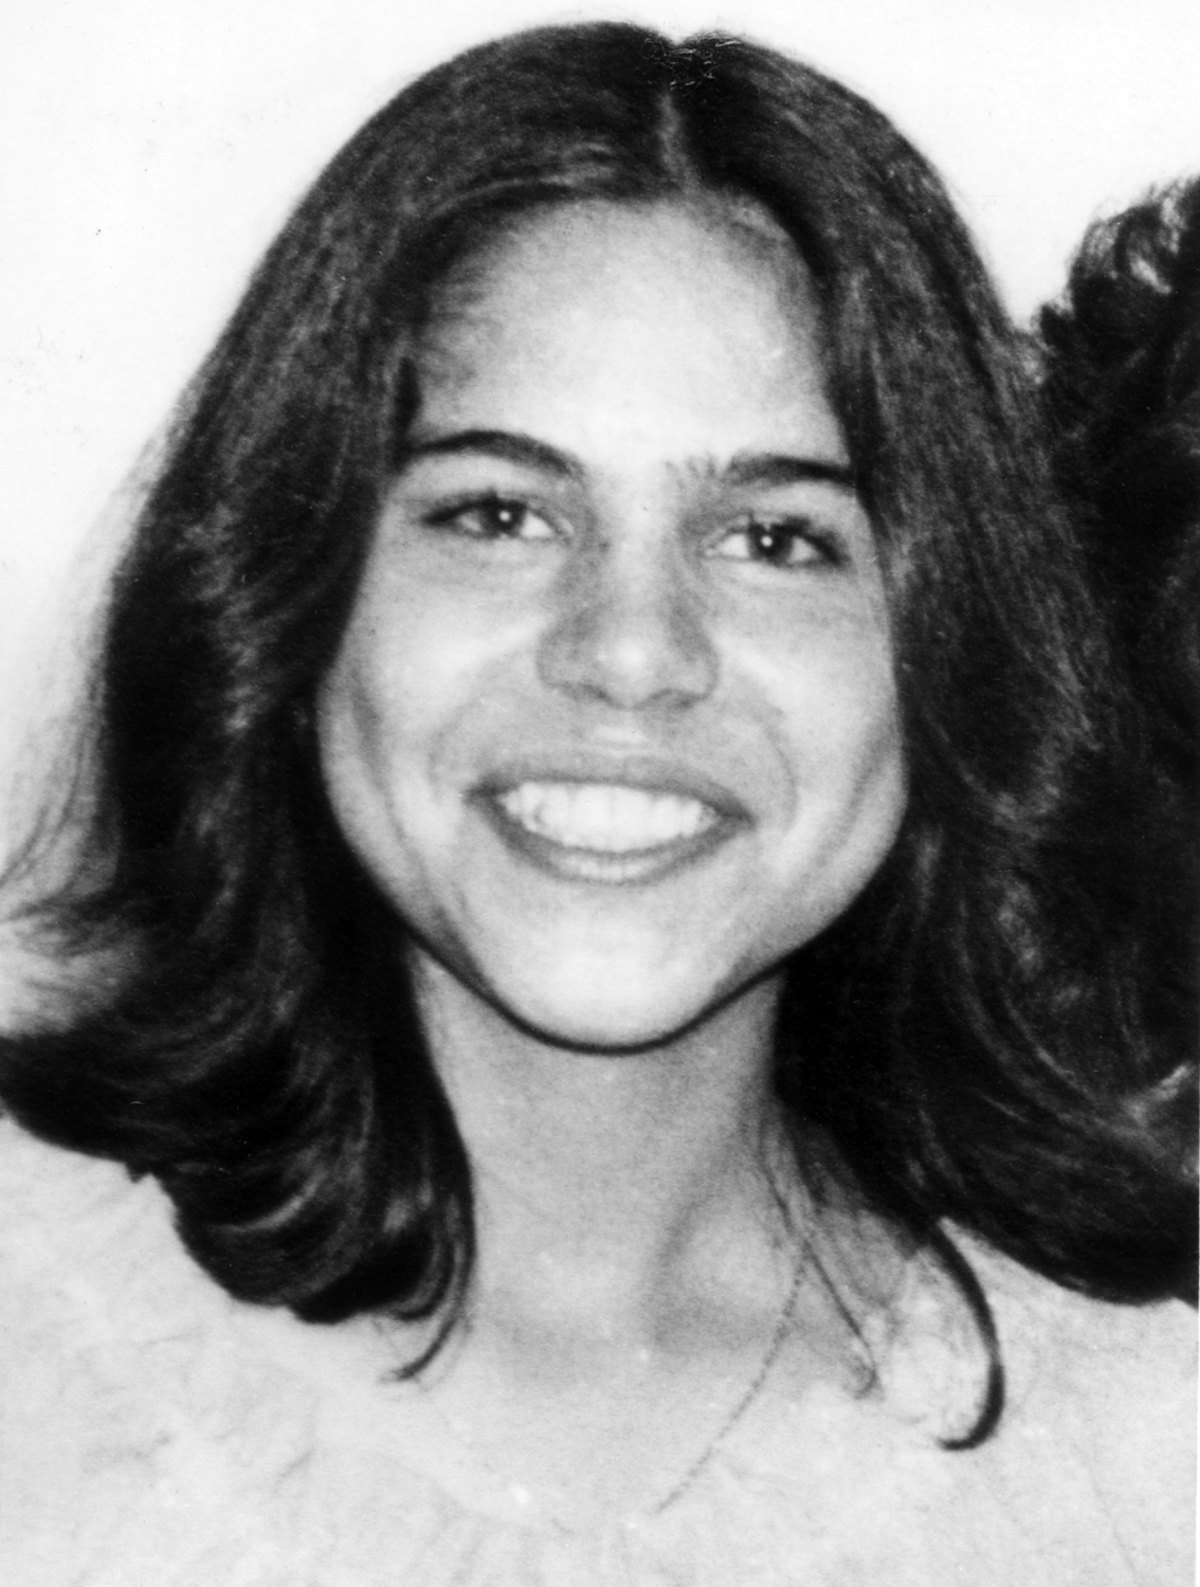 Ten Baha'i women, aged between 17 and 57, were hanged in Shiraz on 18 June 1983, convicted of teaching classes to Baha'i children. The youngest was Mona Mahmudnizhad, a 17-year-old schoolgirl who because of her youth and conspicuous innocence became a symbol for the entire group. All of the women had been interrogated and tortured in the months leading up to their execution.